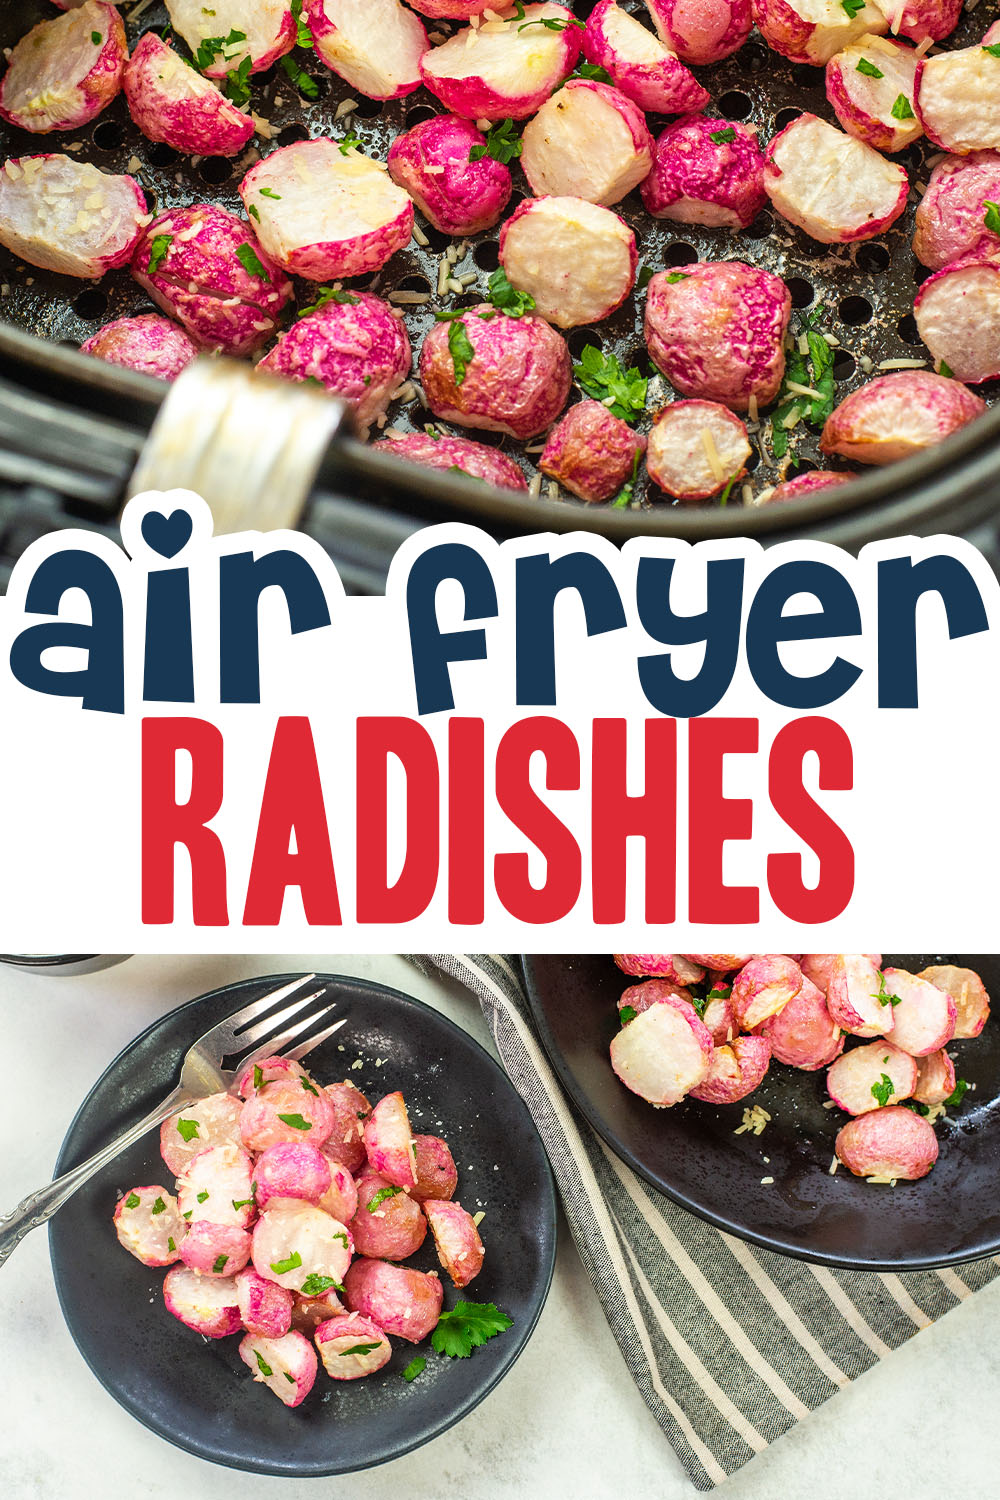 Our cooked radishes are done in just 12 minutes in the air fryer! 
Low carb, healthy, and so tasty!